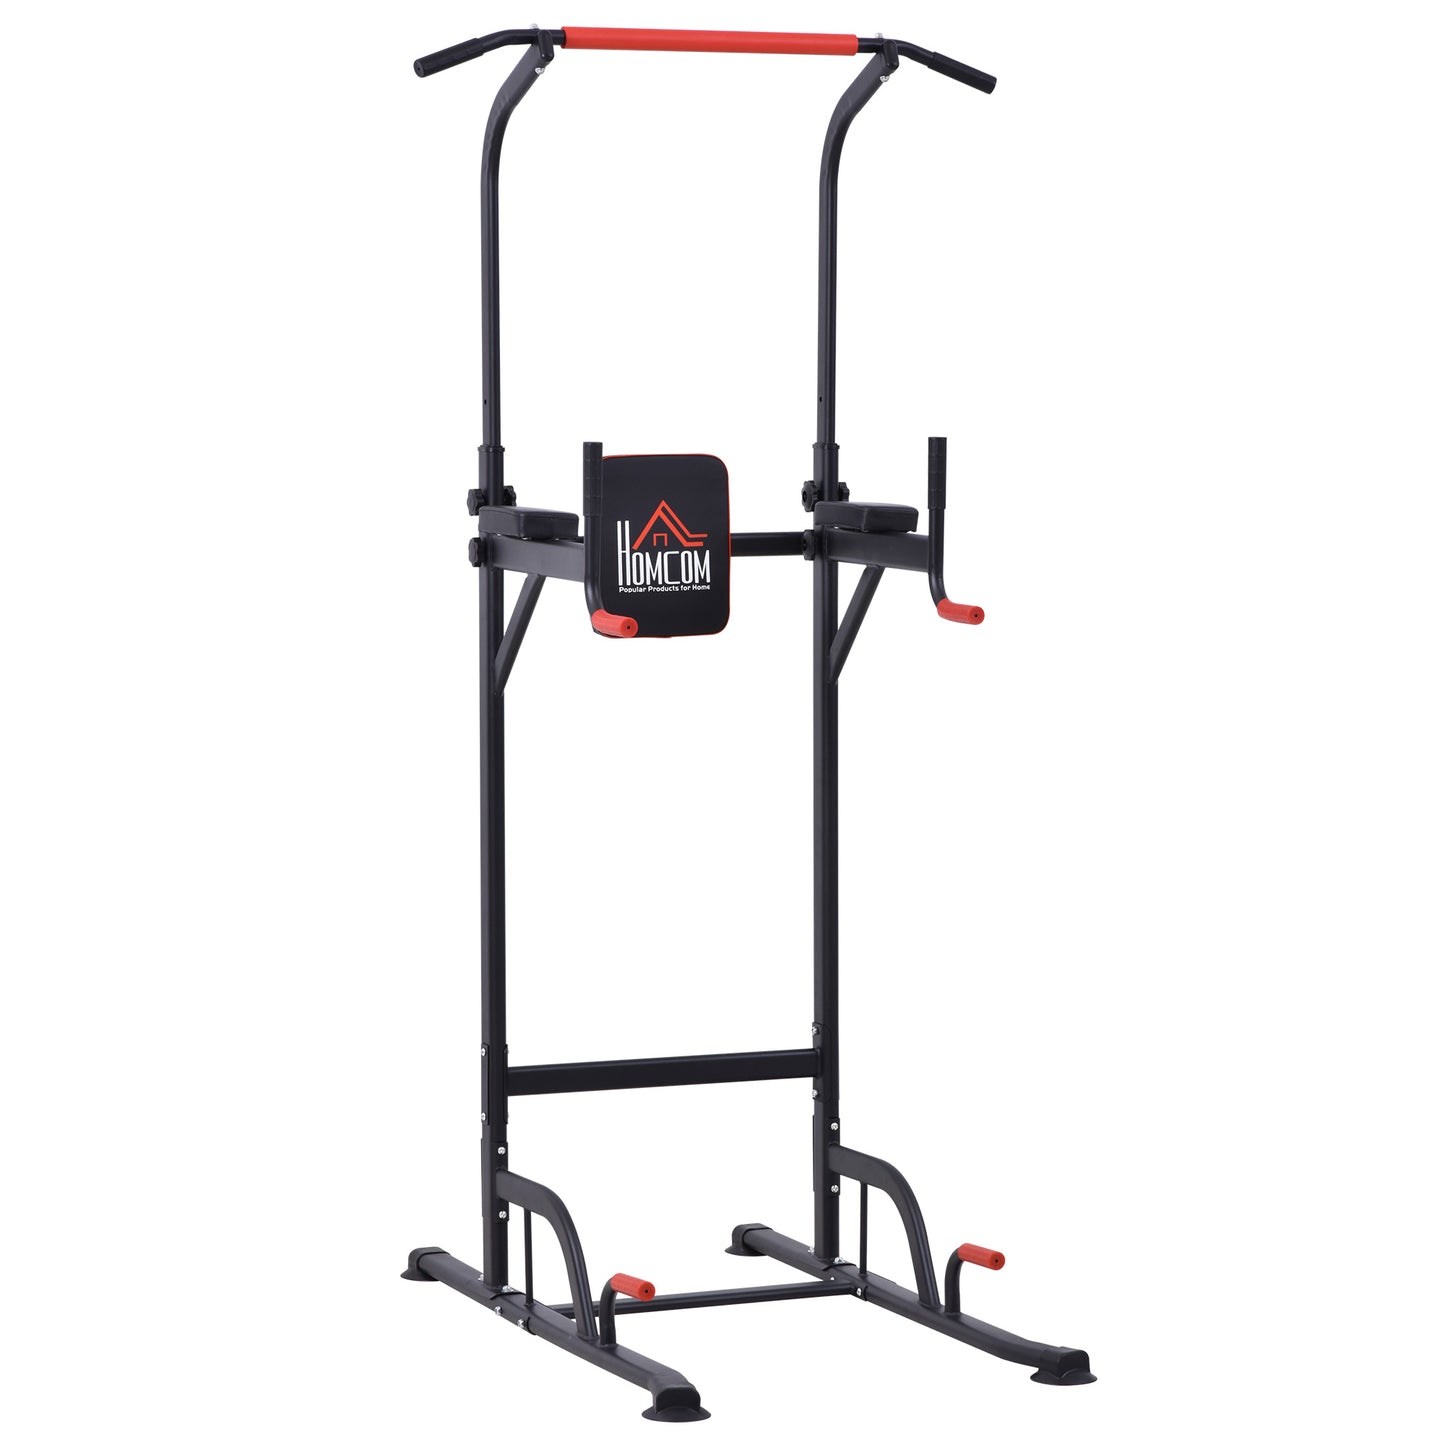 HOMCOM Pull Up Station Power Tower Station Bar Home Gym Workout